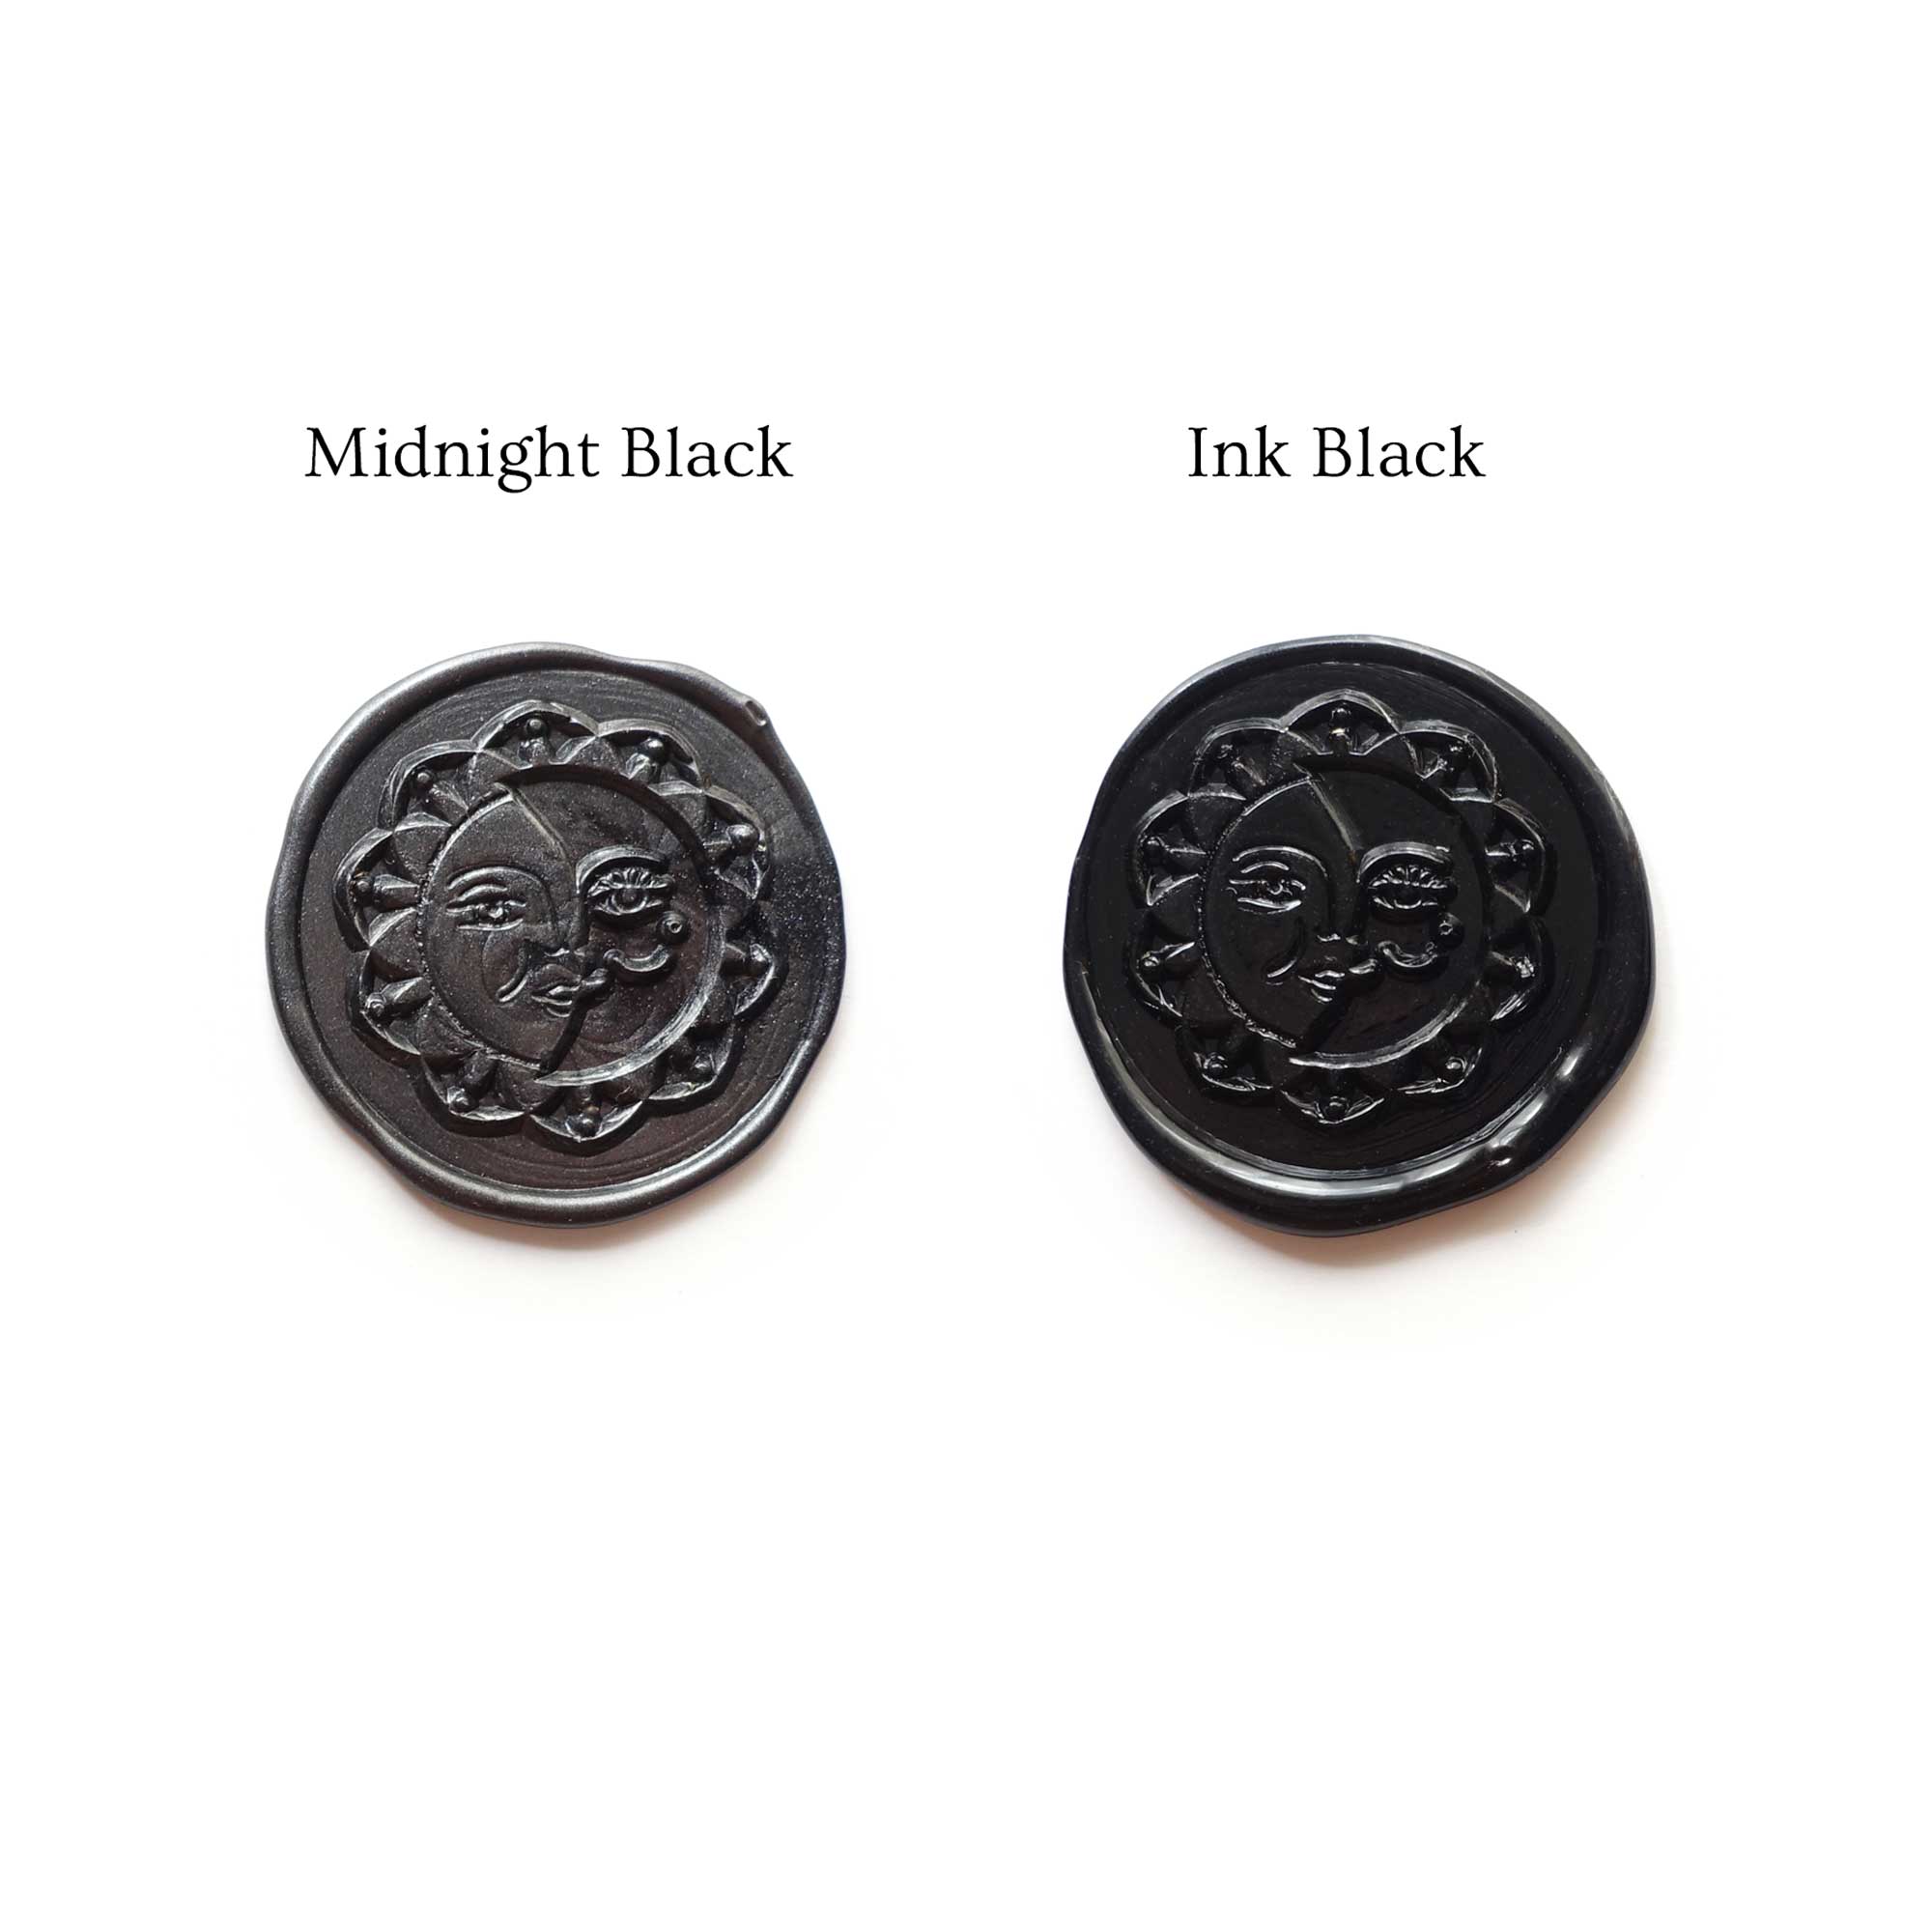 Black Floral Wax Seal Sticker (set of 10) Marketplace Wax Seals by undefined